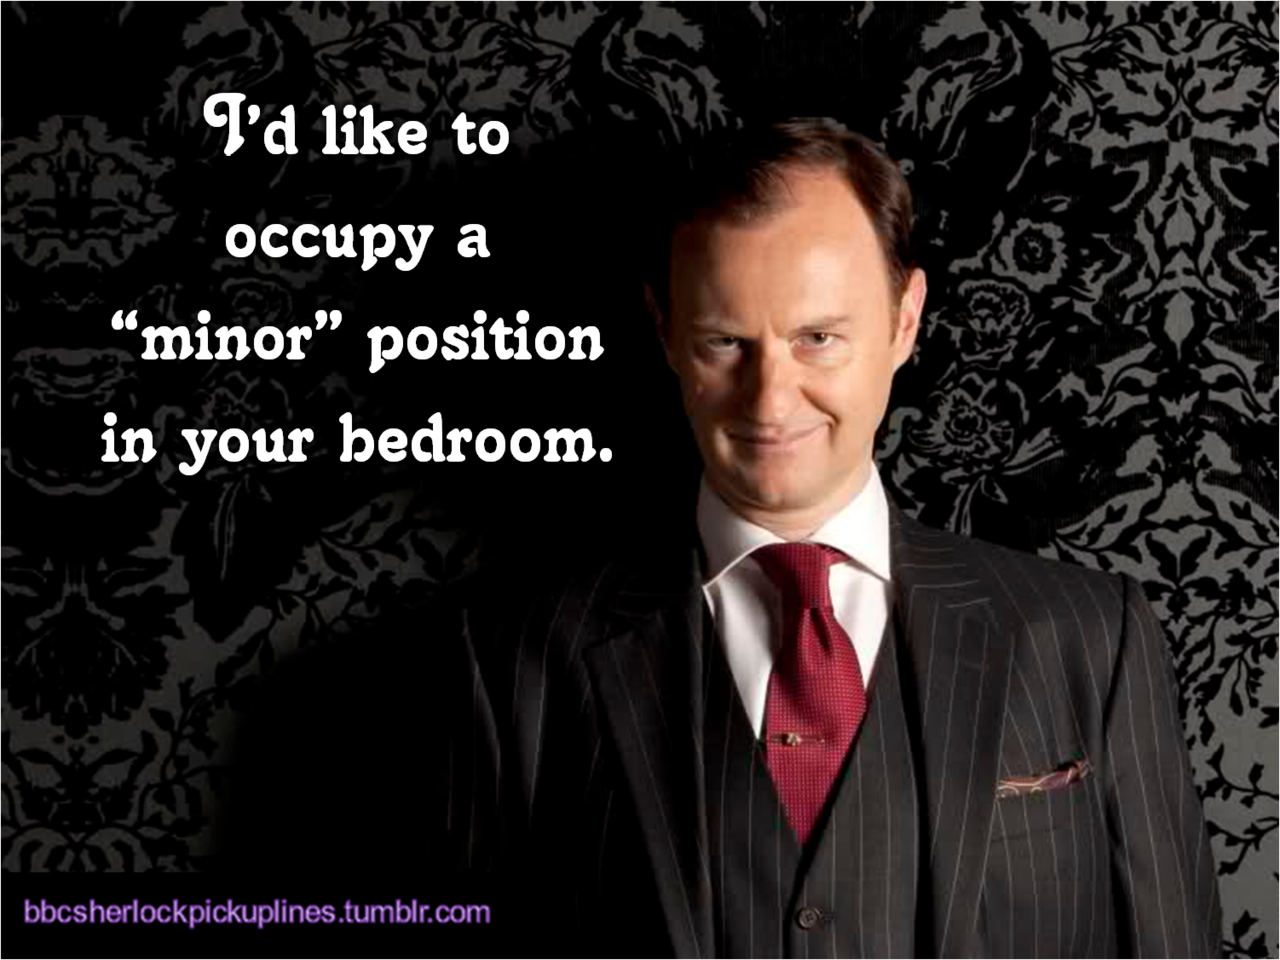 &ldquo;I&rsquo;d like to occupy a &lsquo;minor&rsquo; position in